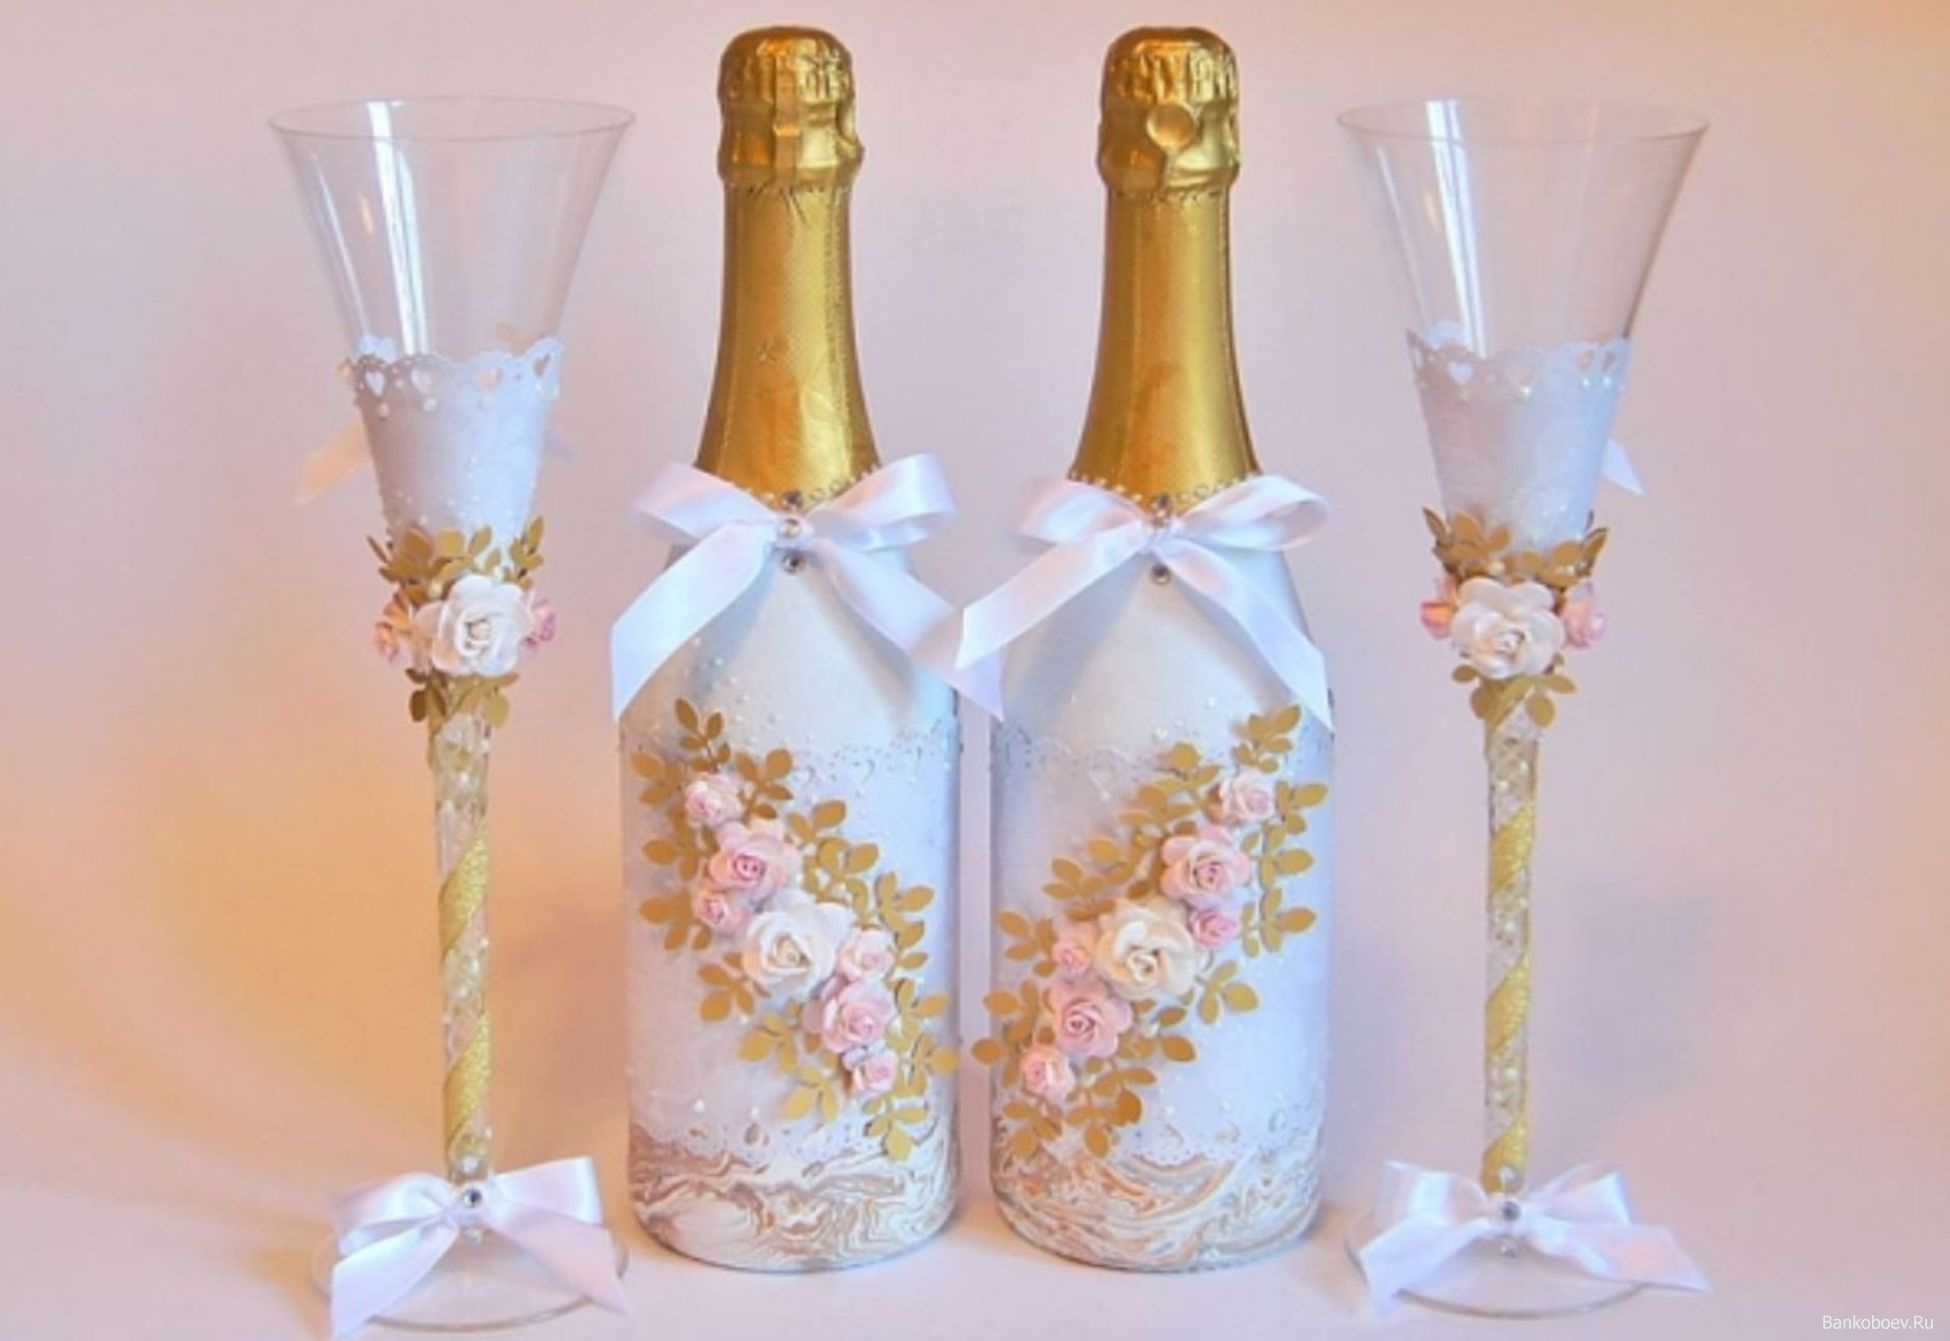 unusual decoration of bottles with colorful ribbons